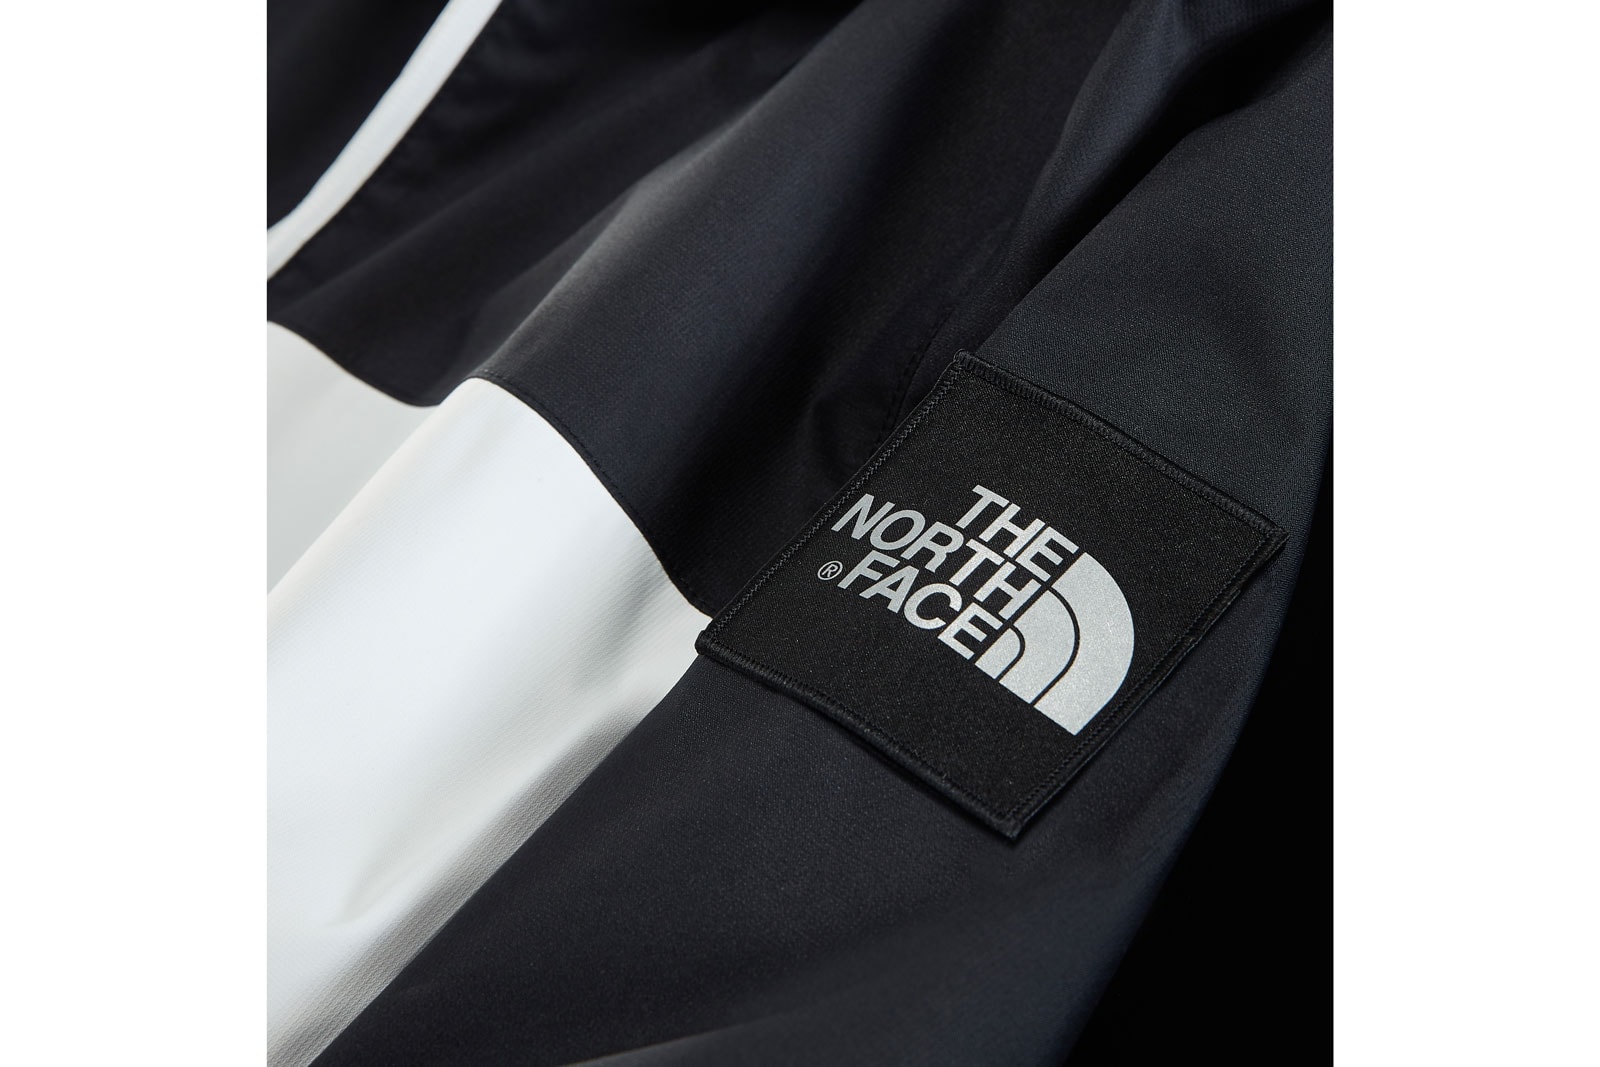 The North Face Lunar Voyage Capsule